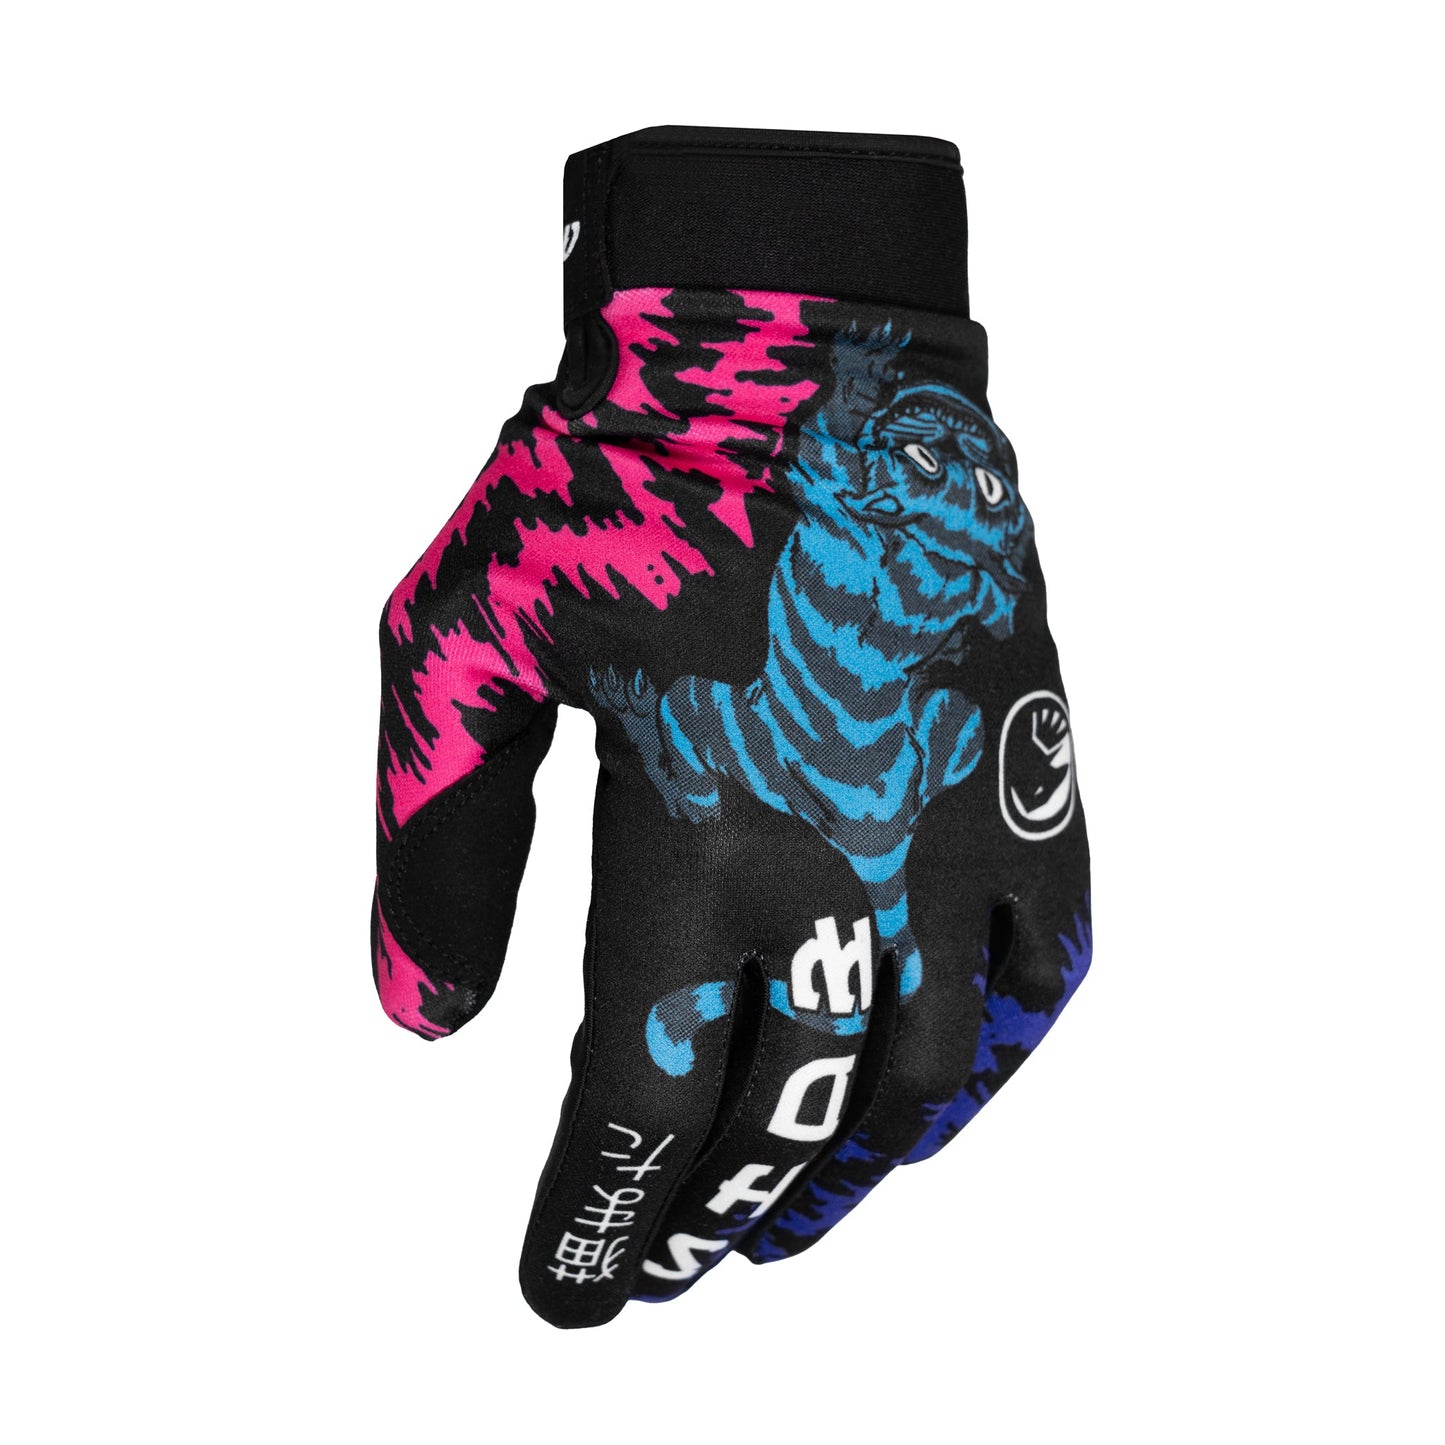 SHADOW Conspire Gloves (Nekomata) - Sparkys Brands Sparkys Brands  Conspire Gloves, Gloves, Protection, Riding Gear, Shadow Riding Gear, The Shadow Conspiracy bmx pro quality freestyle bicycle